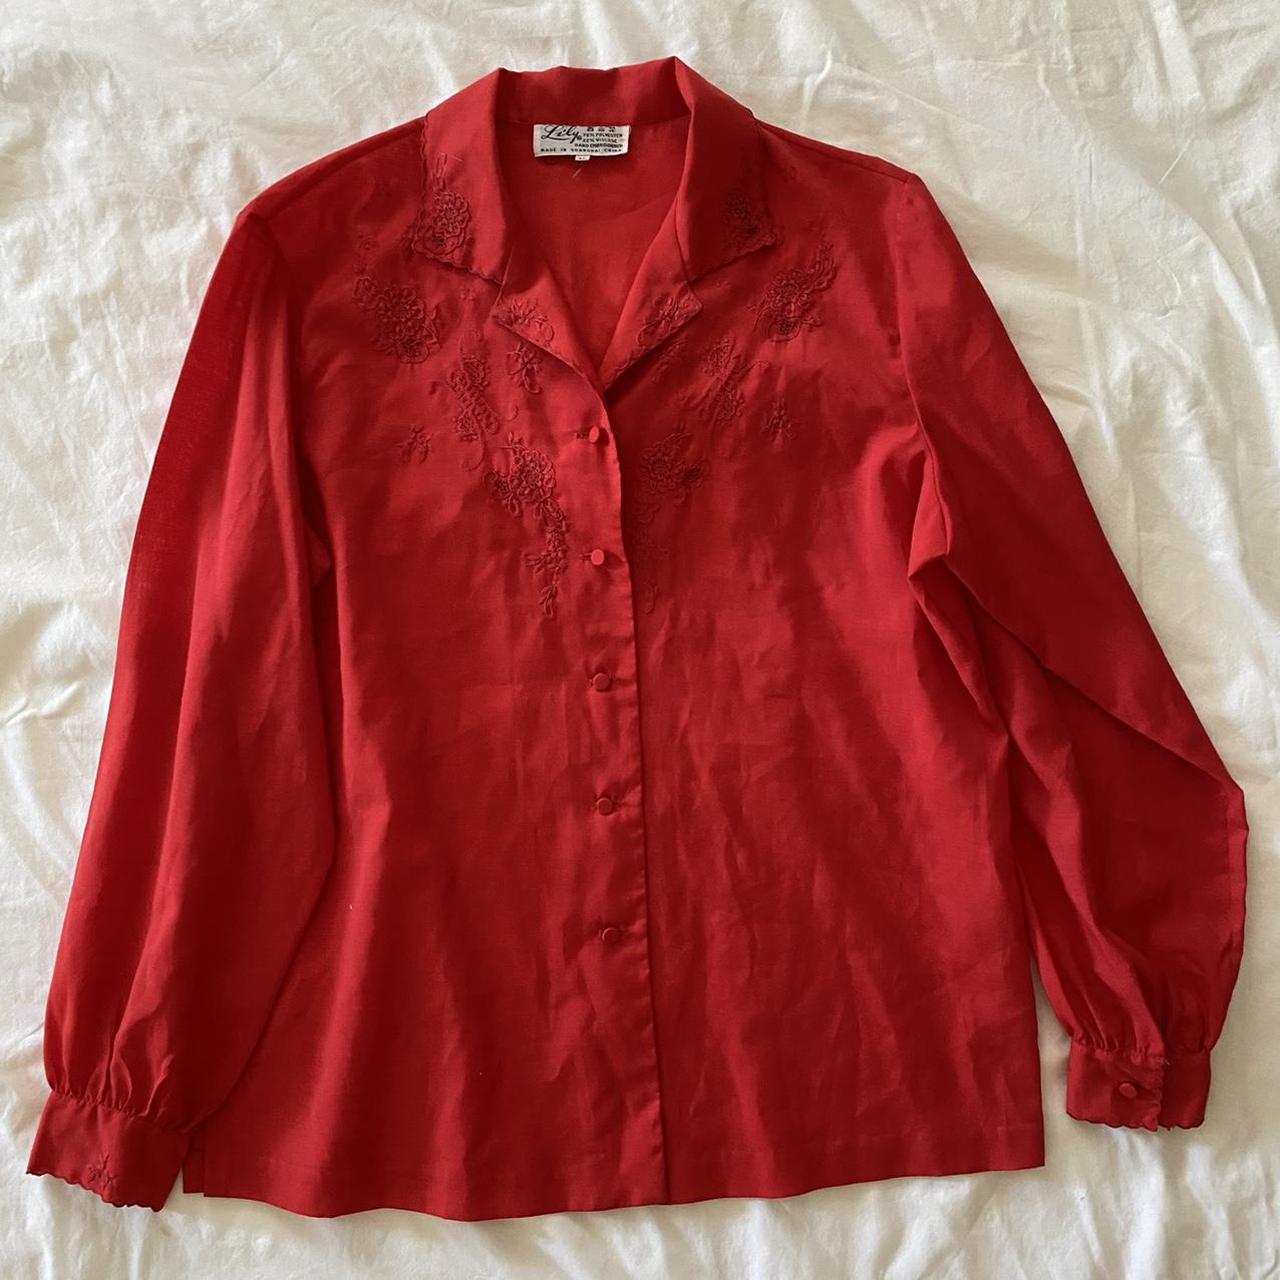 Gorgeous vintage red button up blouse with hand... - Depop